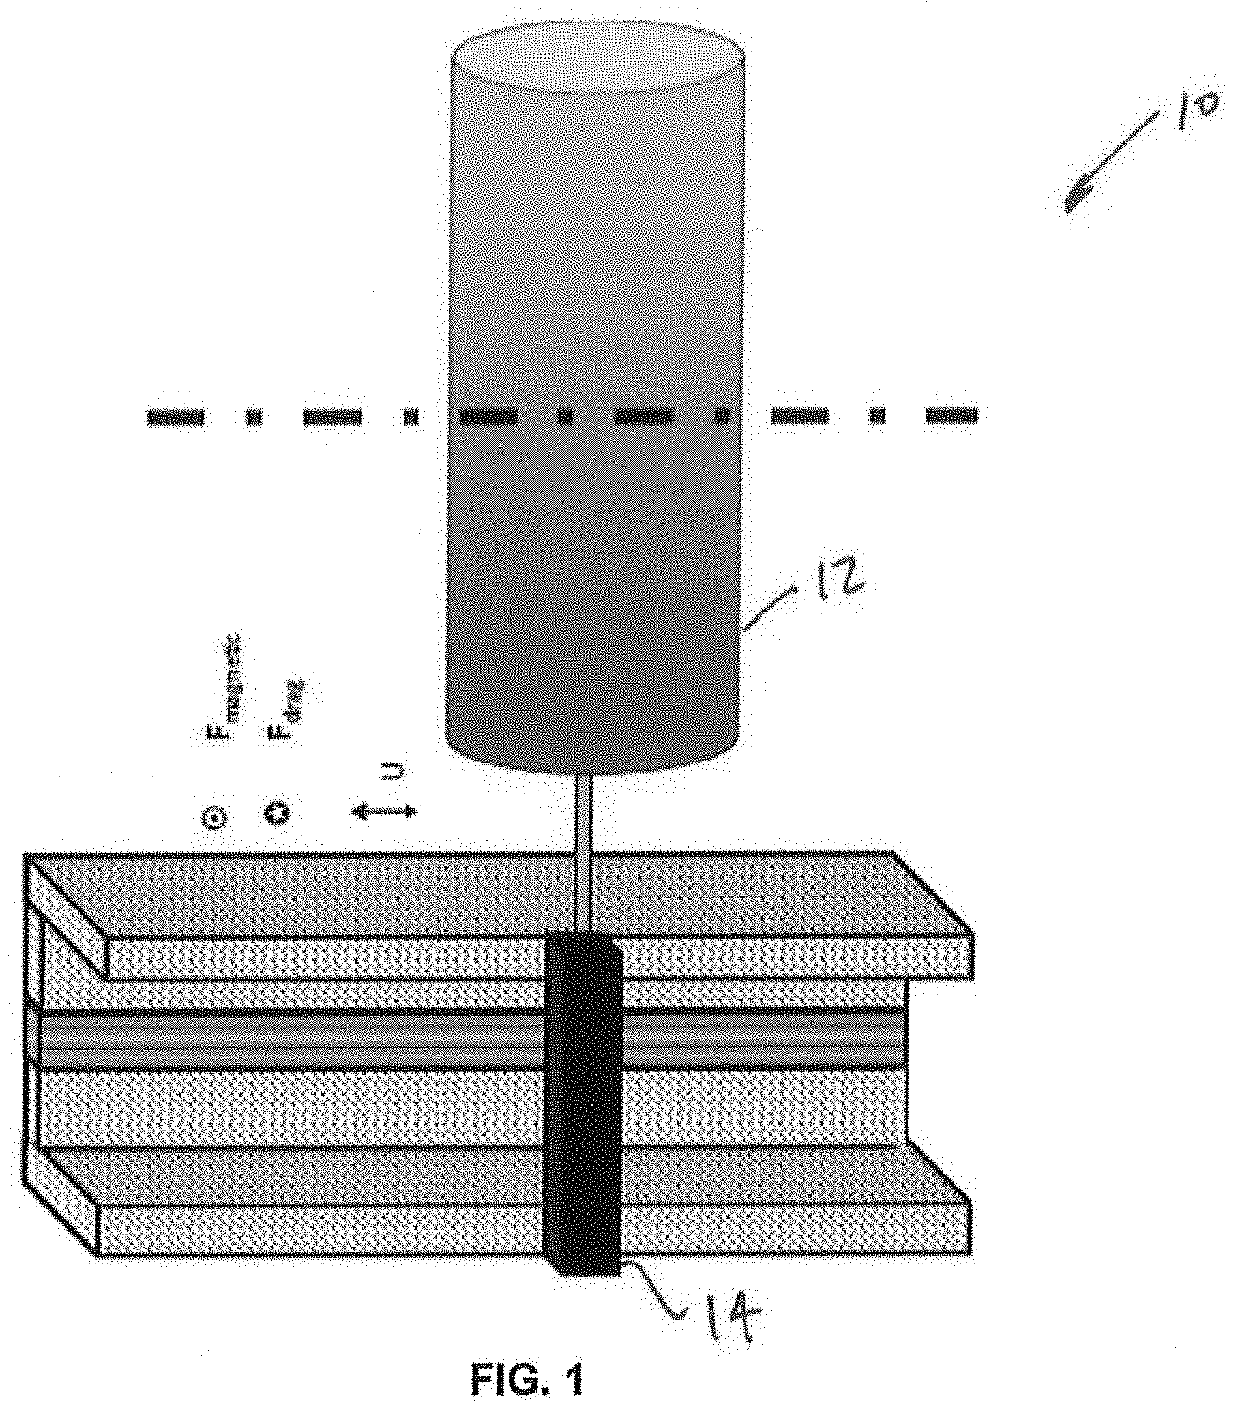 Contact-Less Magnetic Supports For Marine Hydrokinetic Energy Harvesting Using Flow Induced Oscillations